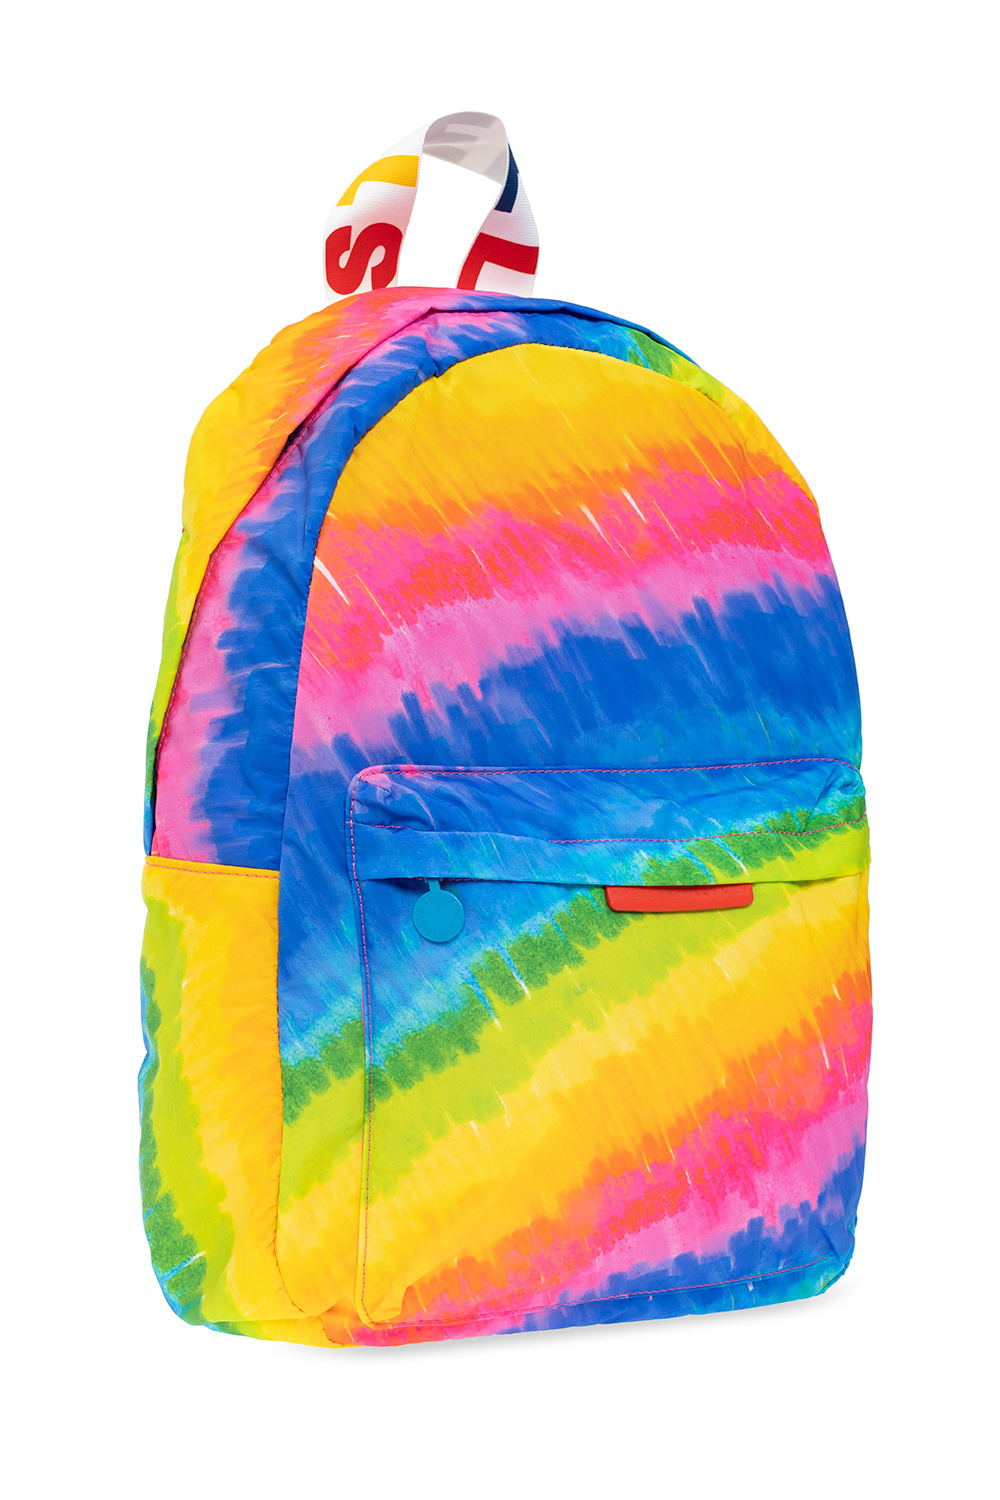 Stella McCartney Kids Backpack in recycled fabric